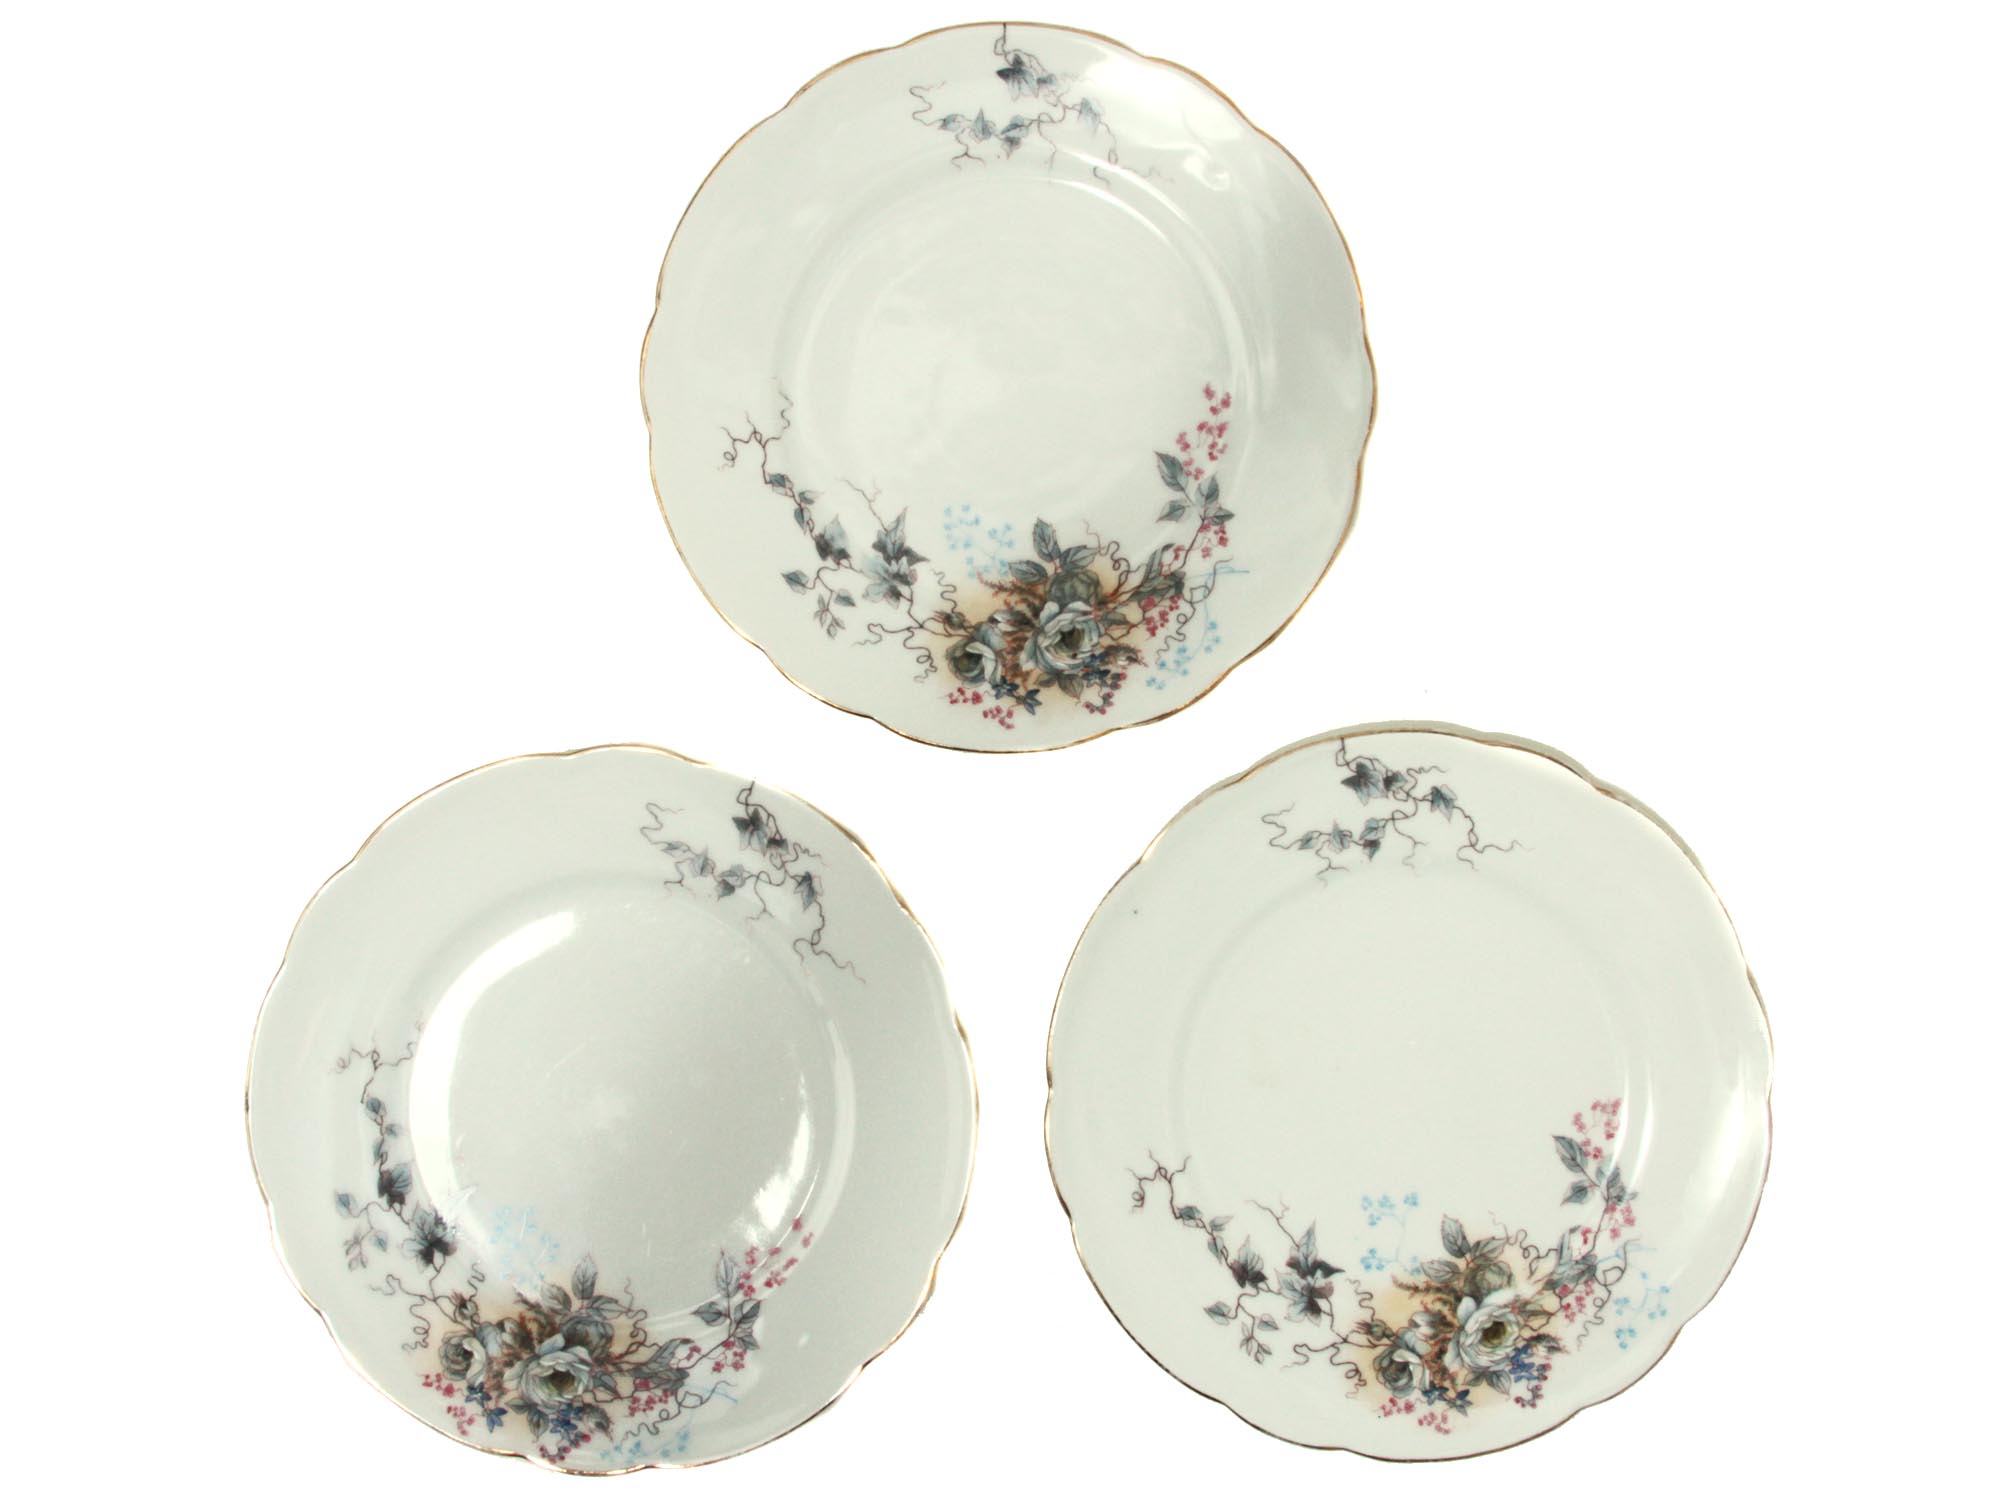 A RUSSIAN PORCELAIN SET OF 3 PLATES BY KUZNETSOV PIC-0